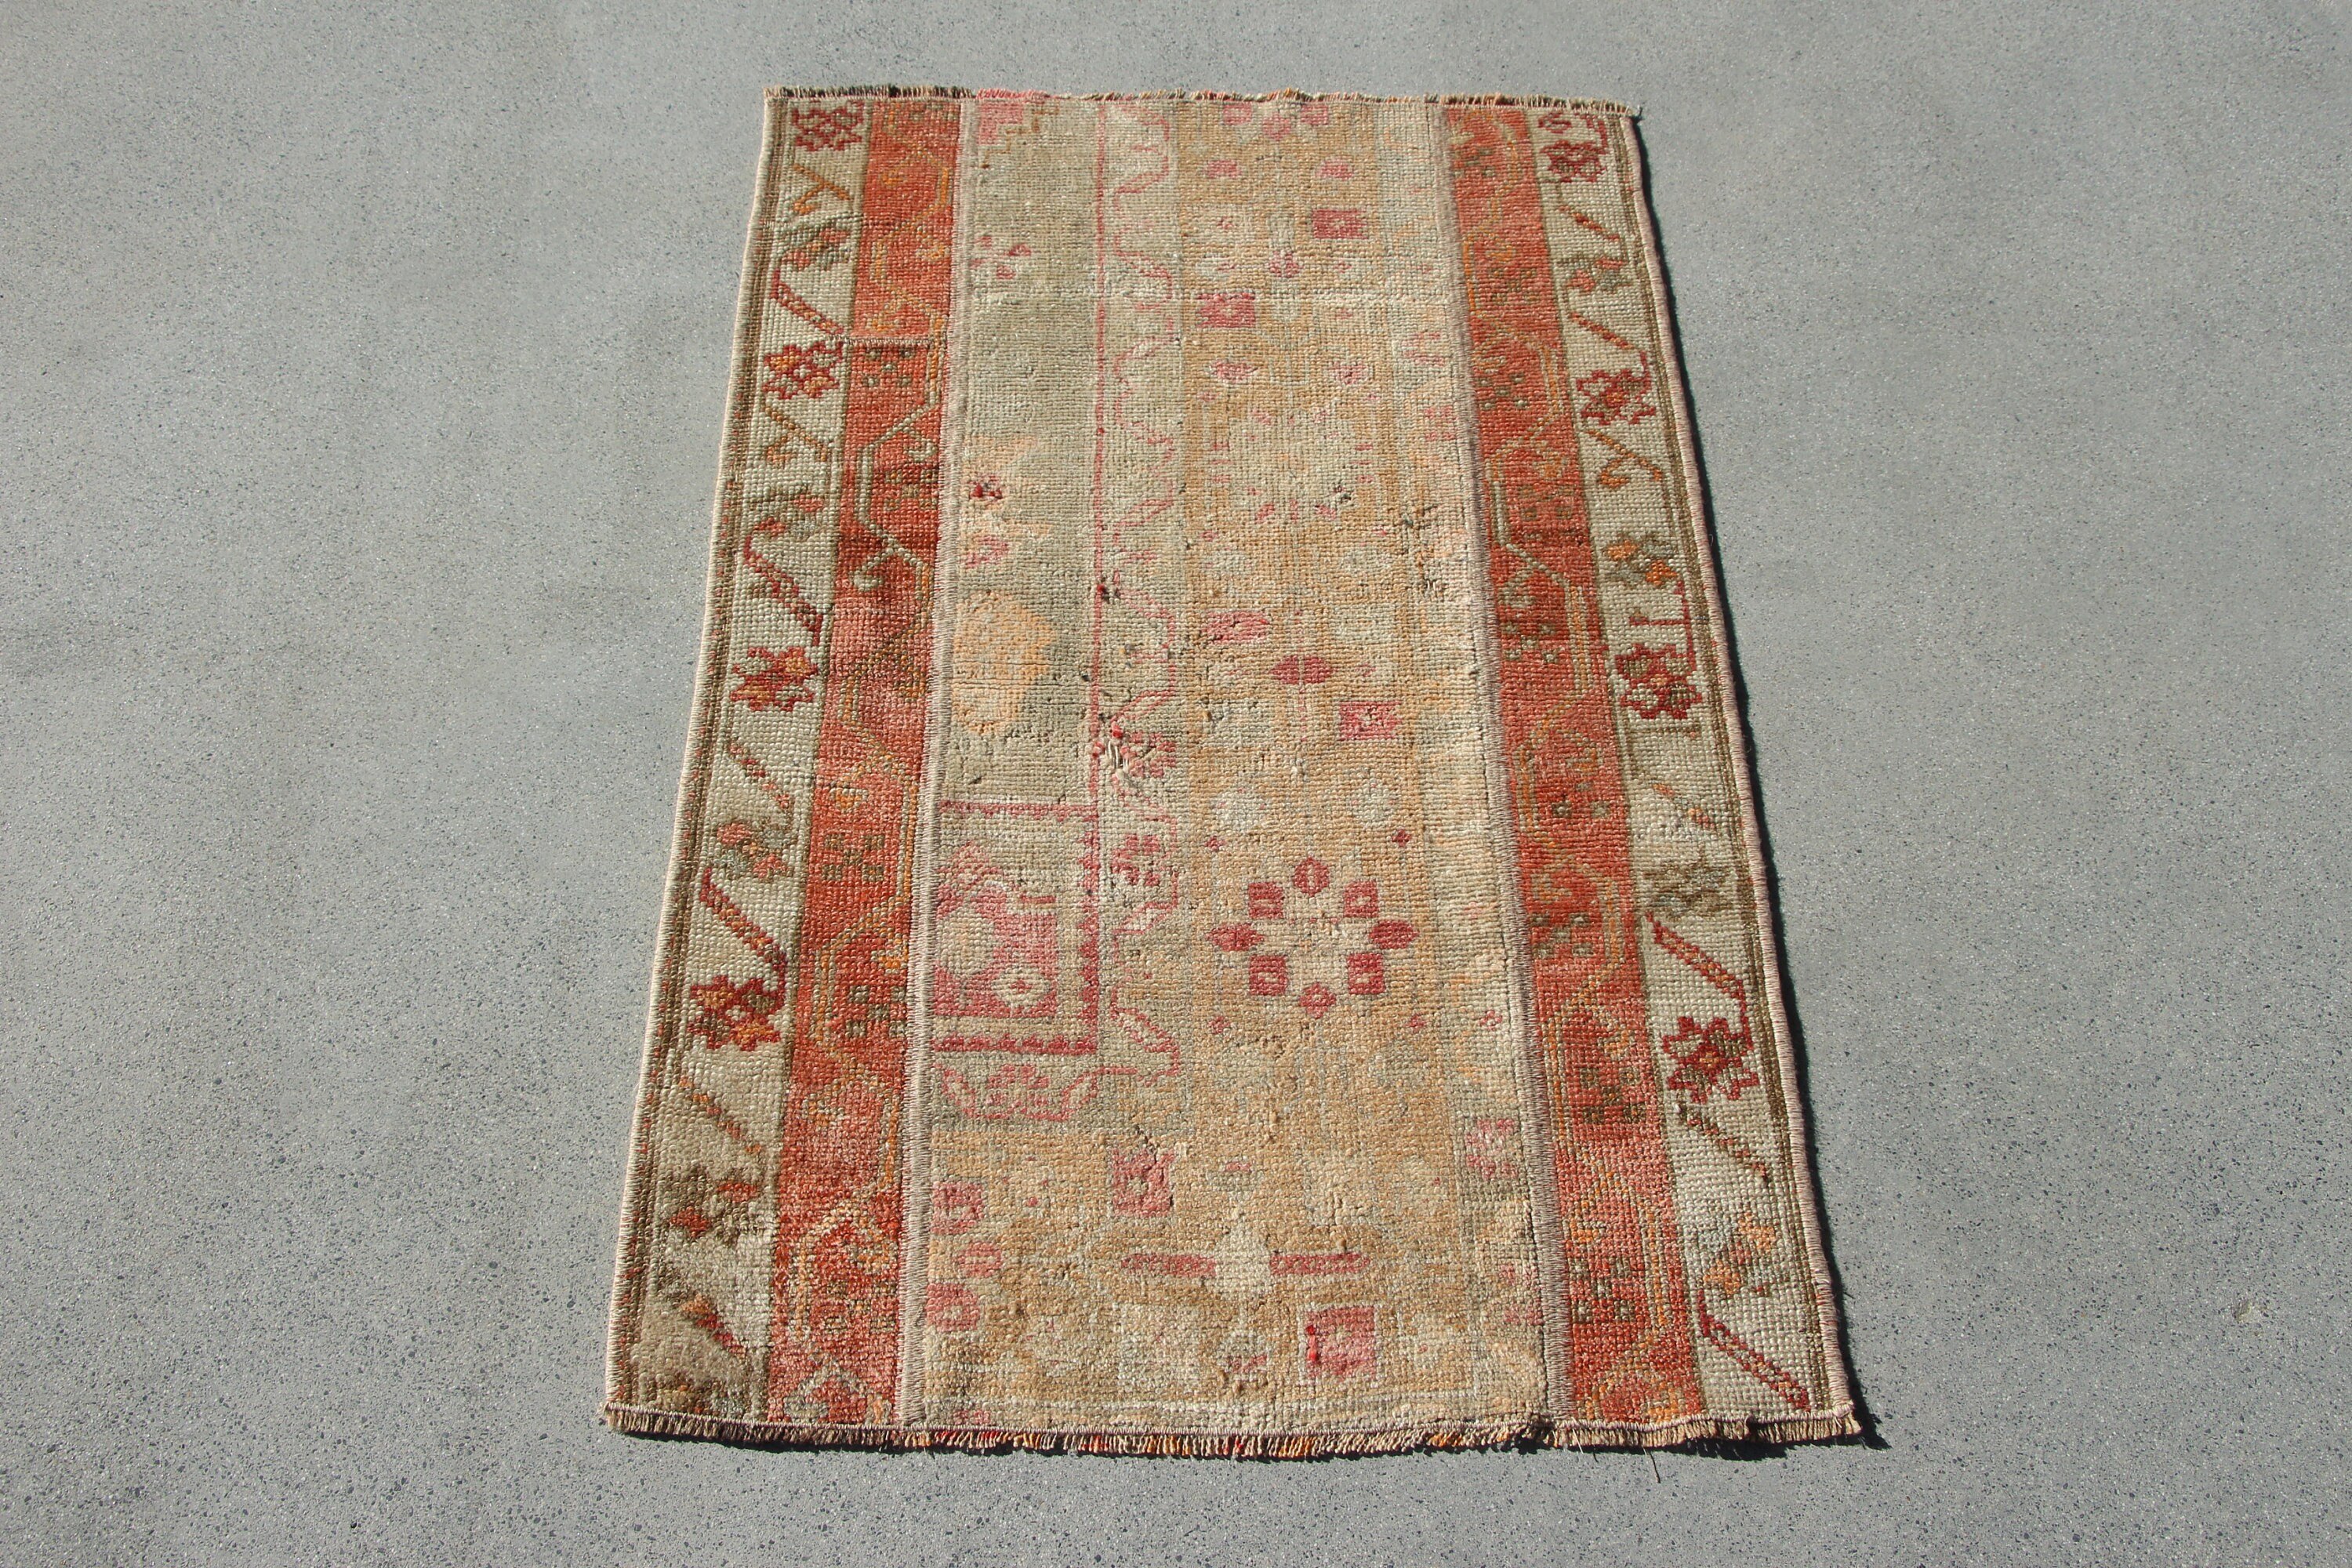 Vintage Rug, White Anatolian Rugs, Anatolian Rug, Bedroom Rugs, Entry Rug, Cool Rug, Rugs for Car Mat, 2.1x3.3 ft Small Rugs, Turkish Rugs